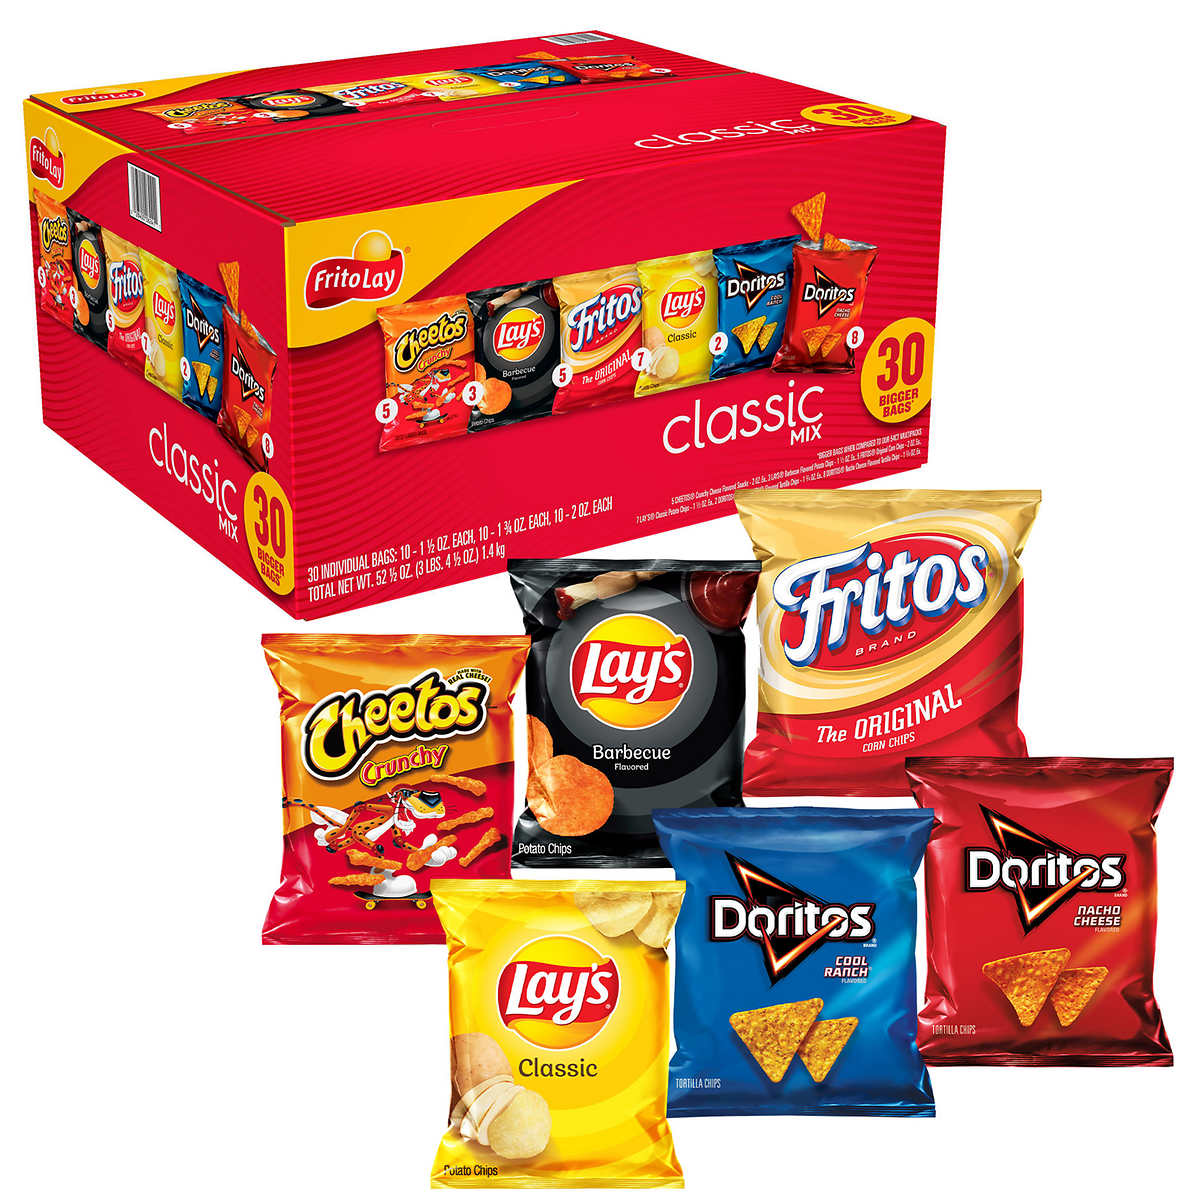 Frito Lay Classic Mix, Variety Pack, 30-count